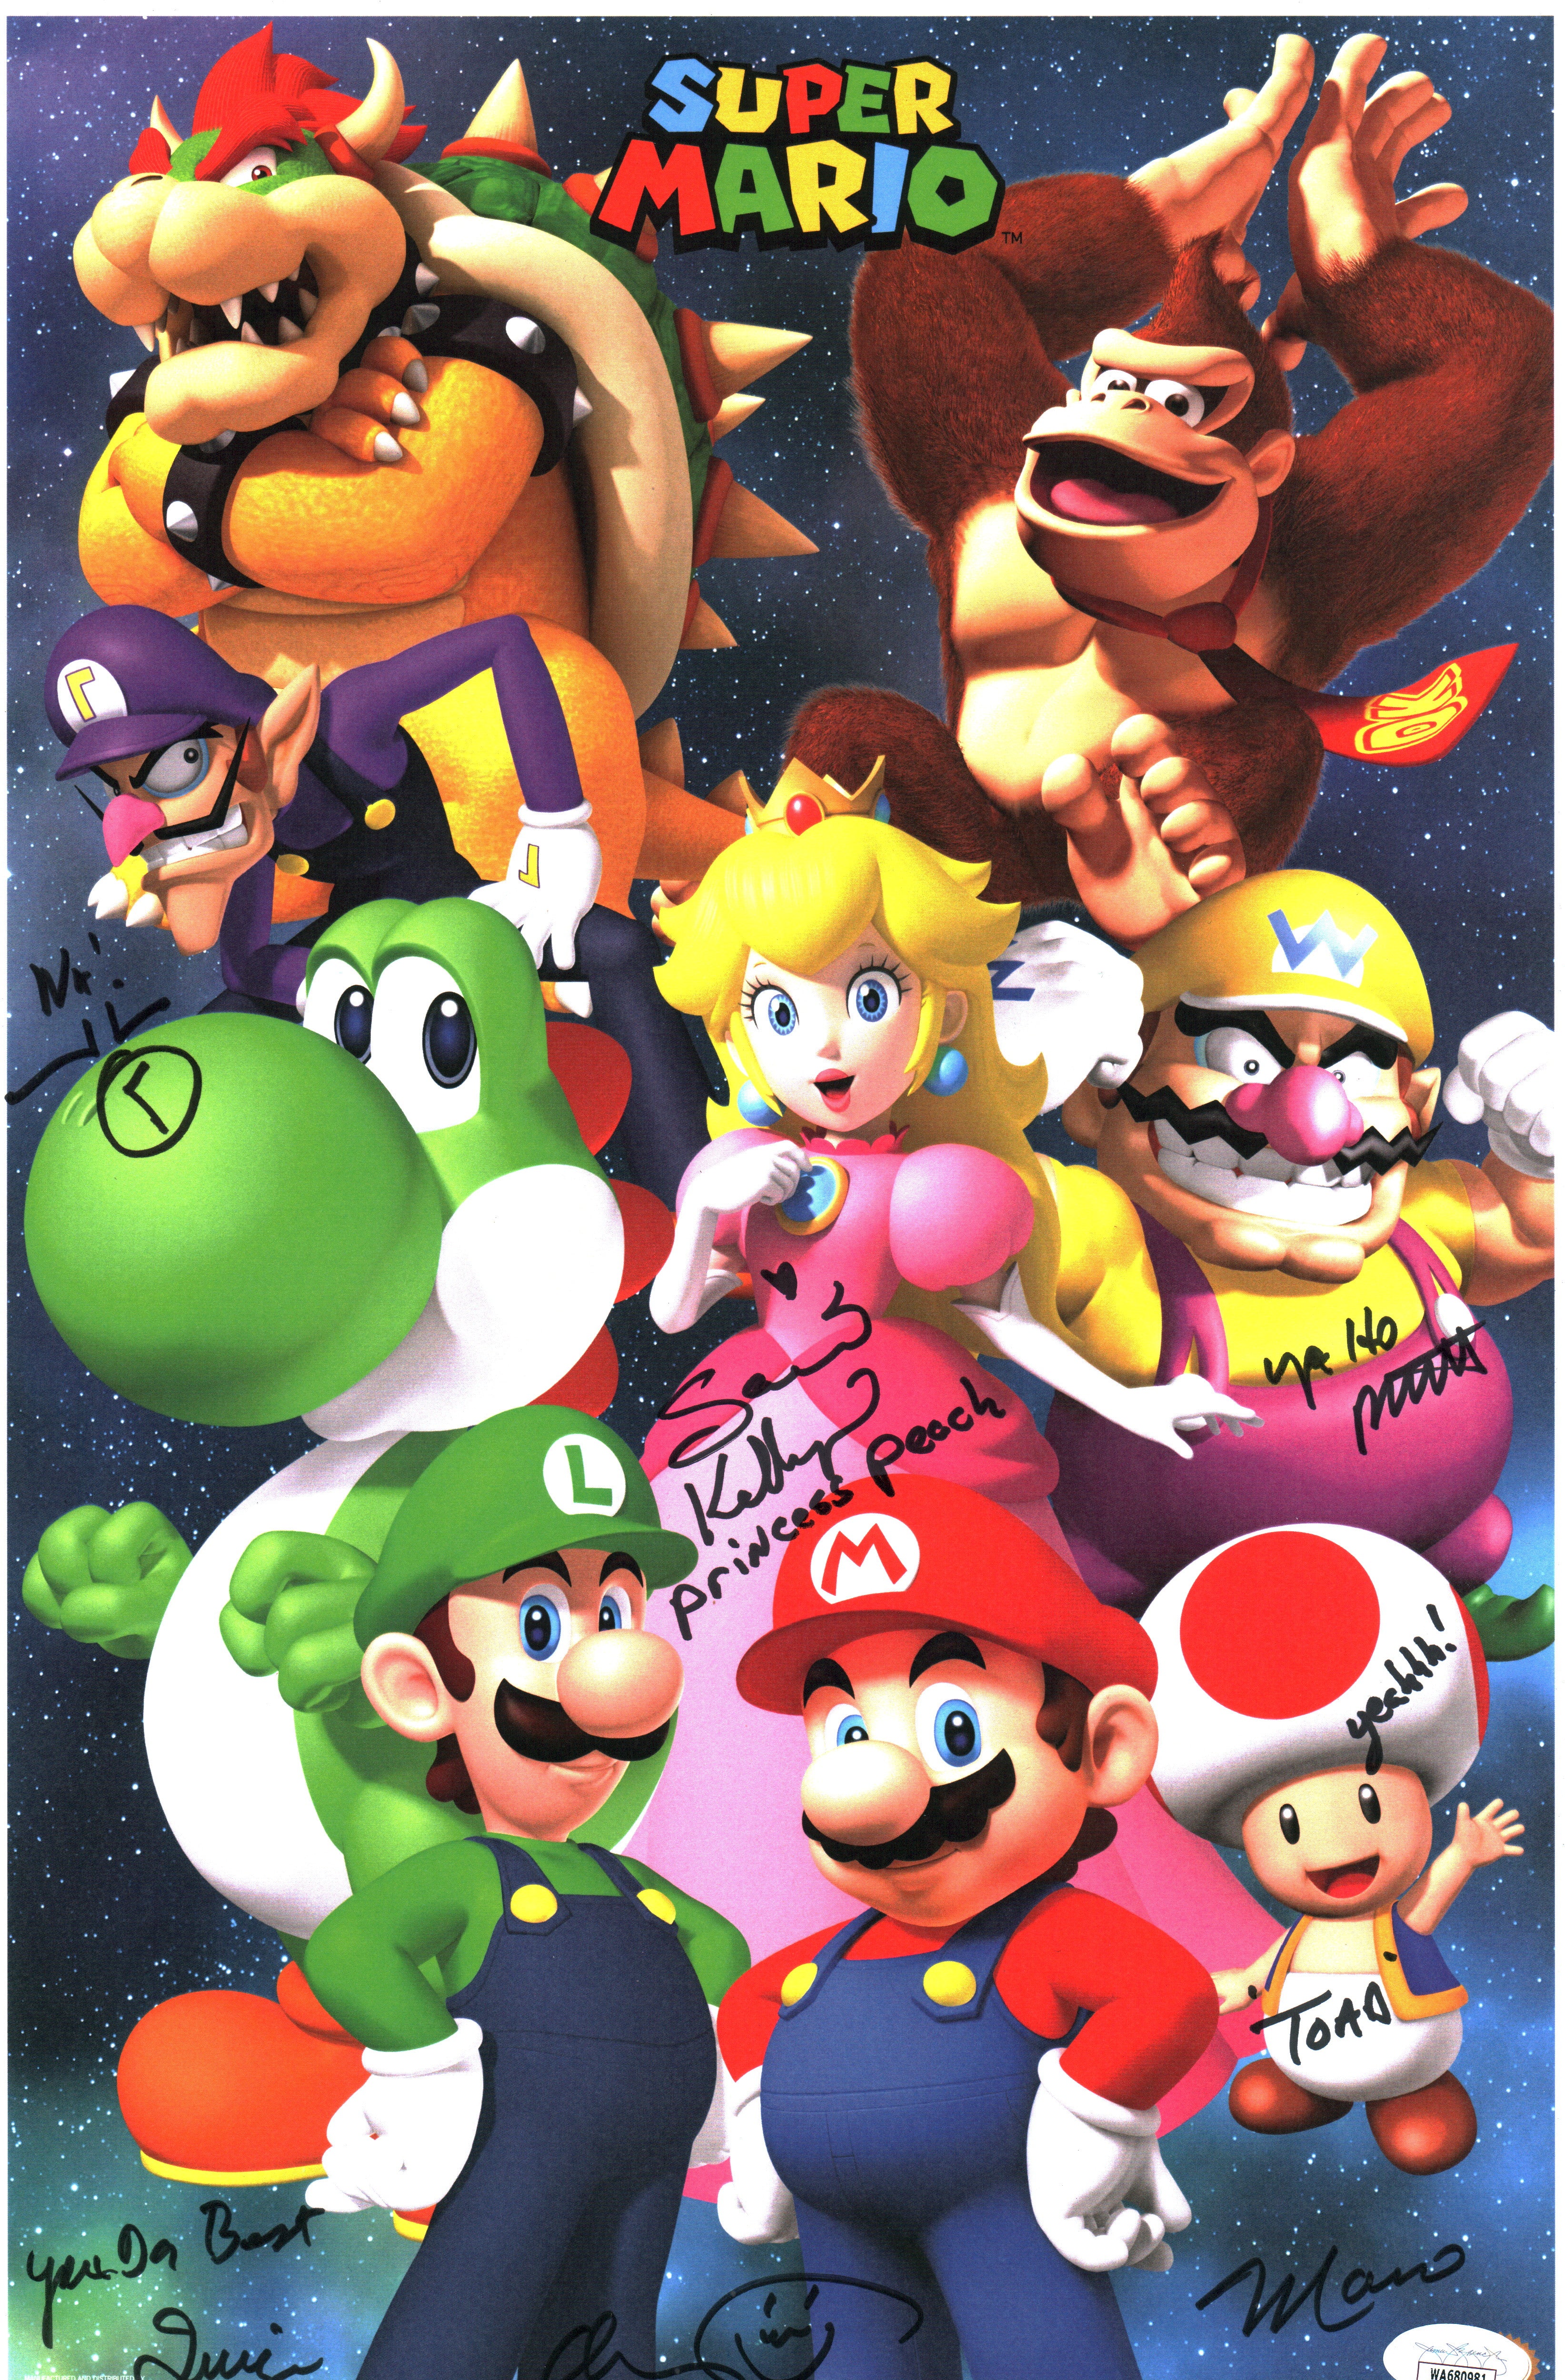 Super Mario 11x17 Cast Photo Poster x2 Signed Kelly Martinet JSA Certified Autograph